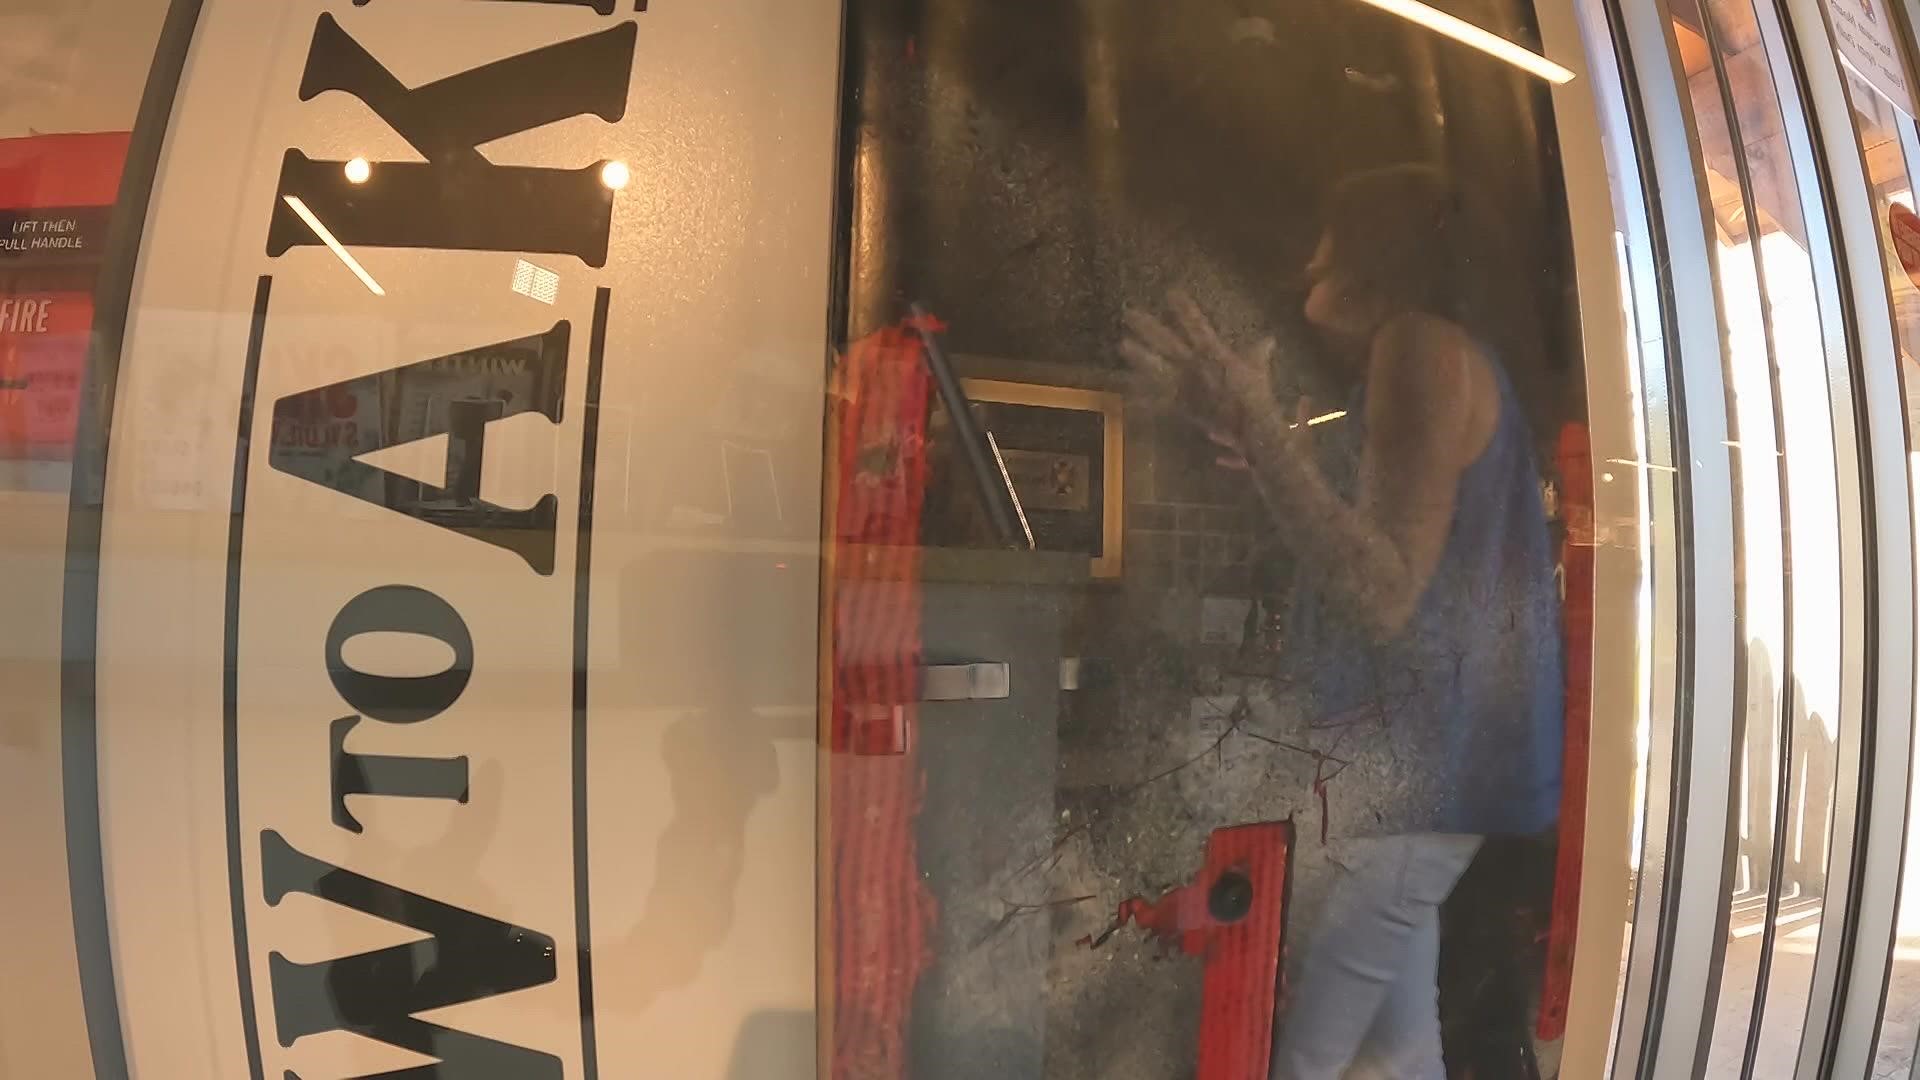 The Colorado Snowsports Museum in Vail put up a new display of the snowboard used in the James Bond film "A View To A Kill."